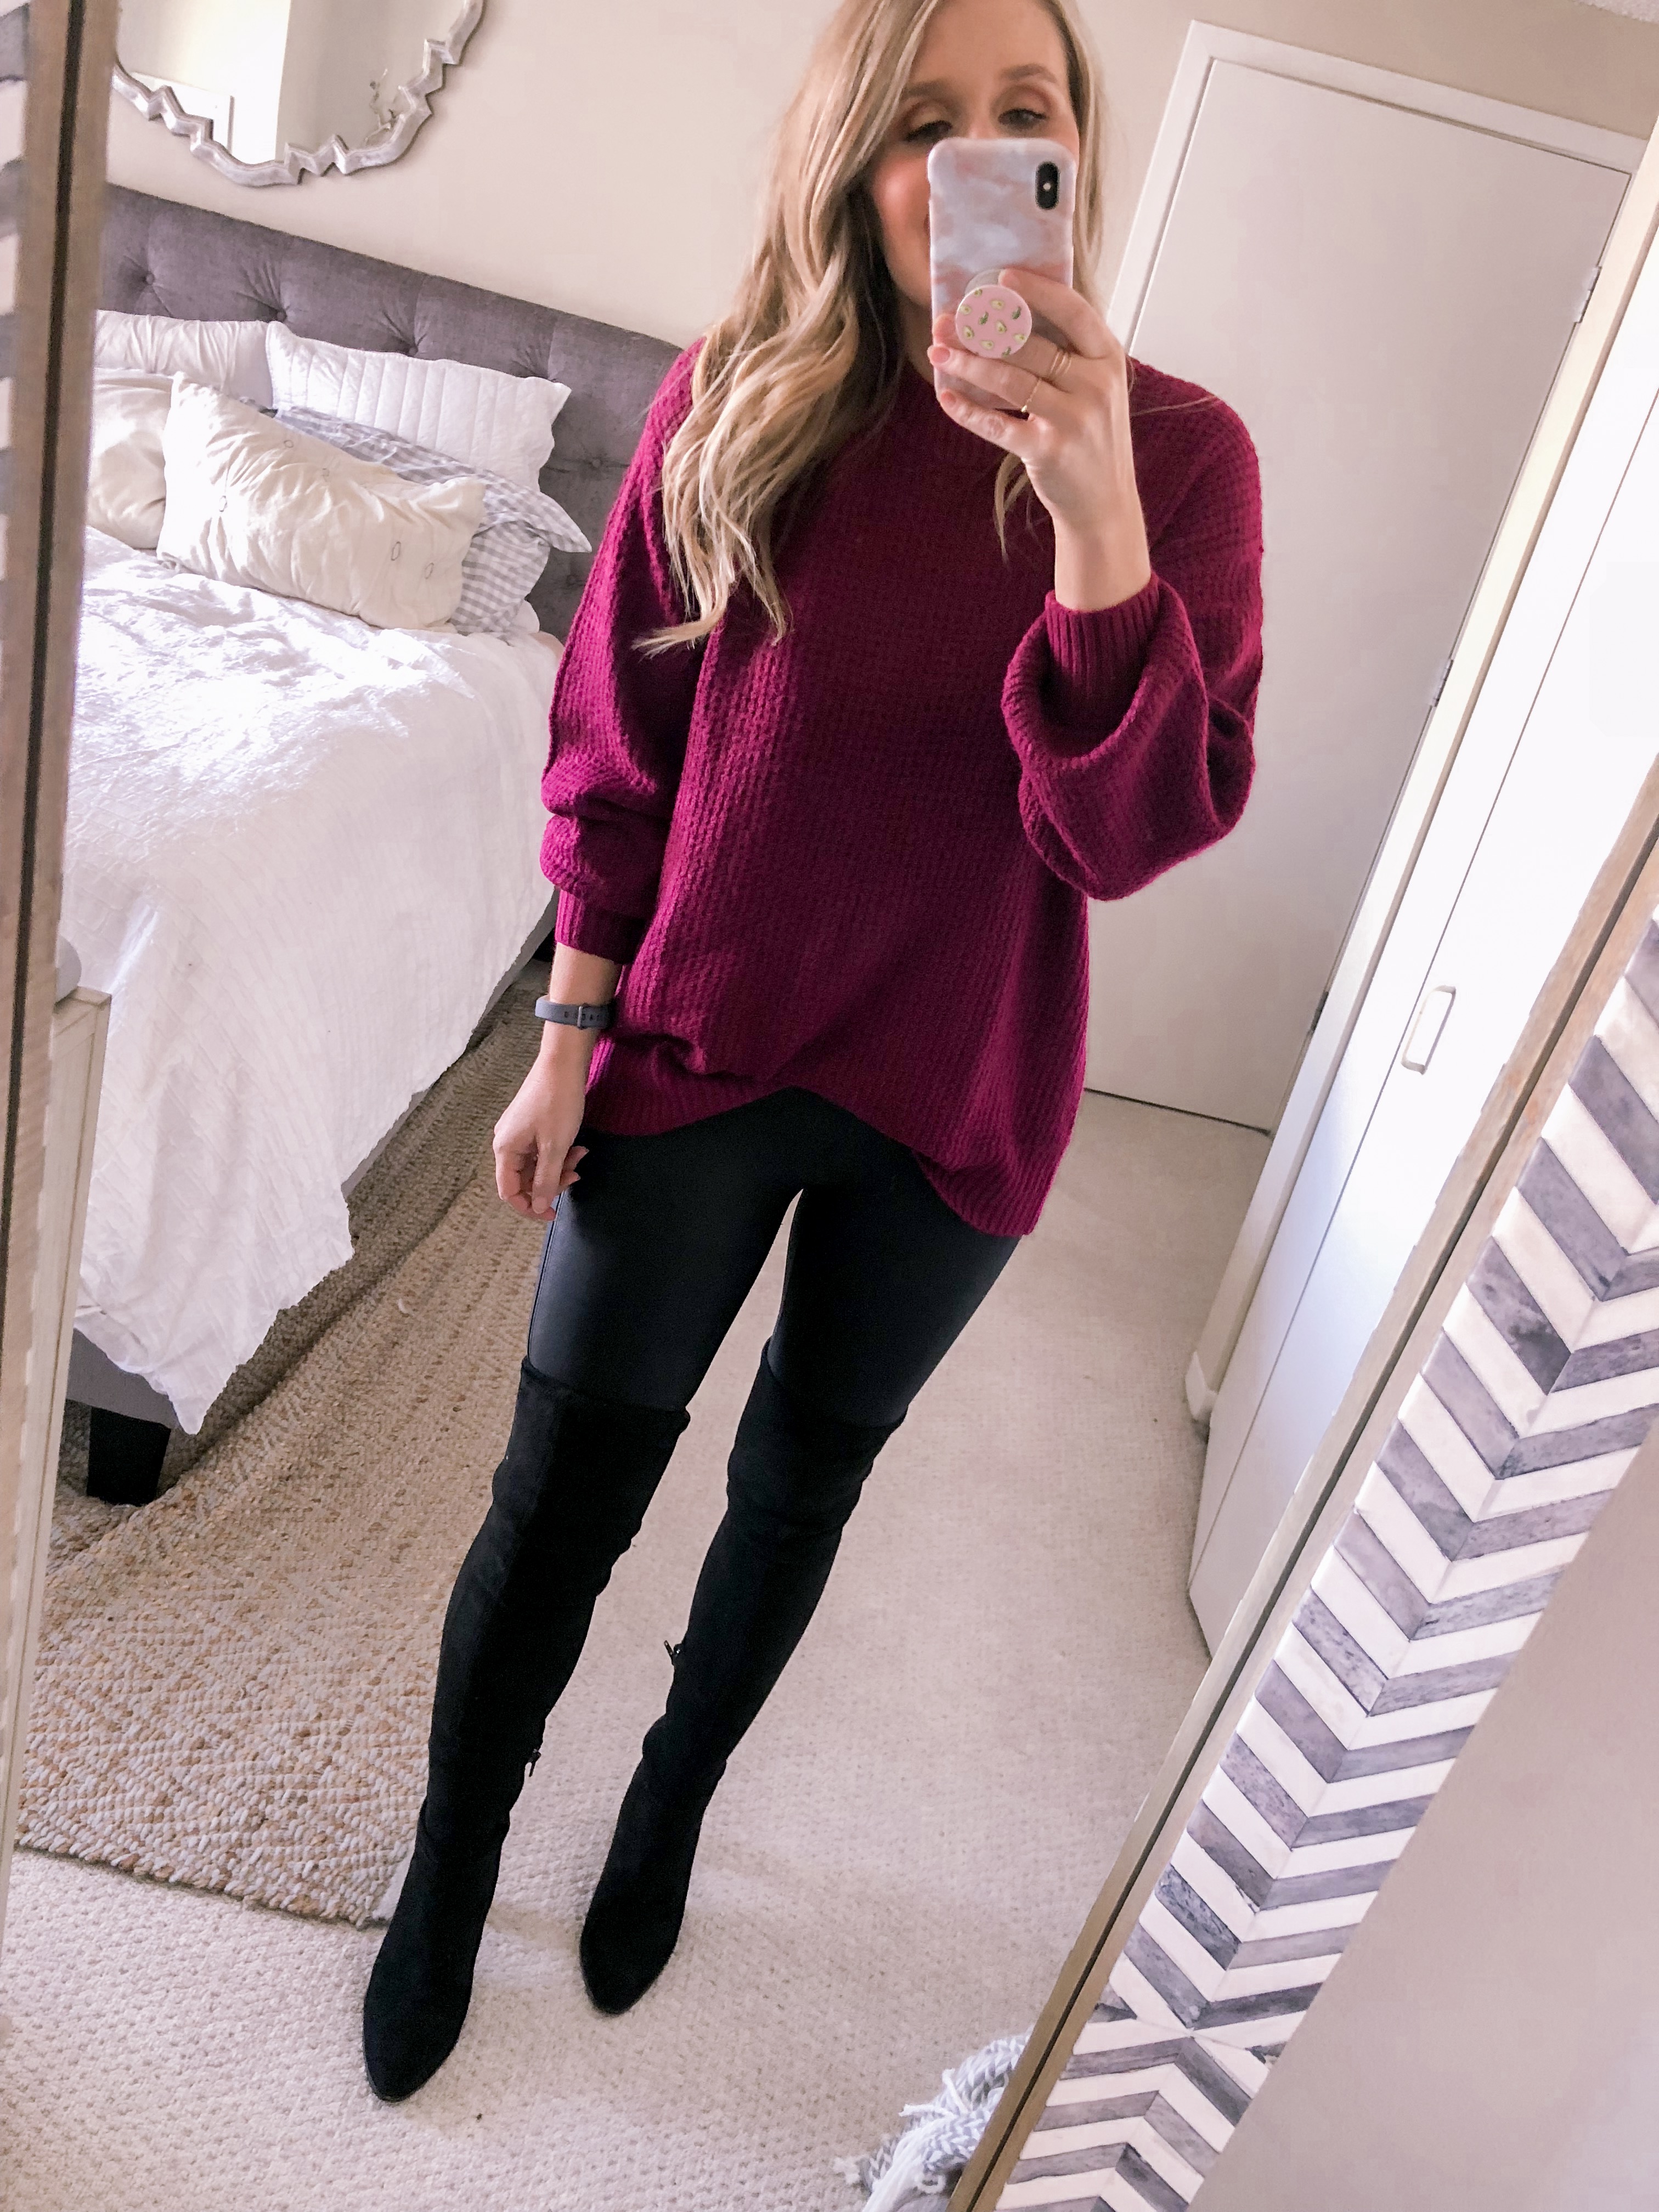 OOTD 10.25.18: Burgundy Sweater with Faux Leather Leggings